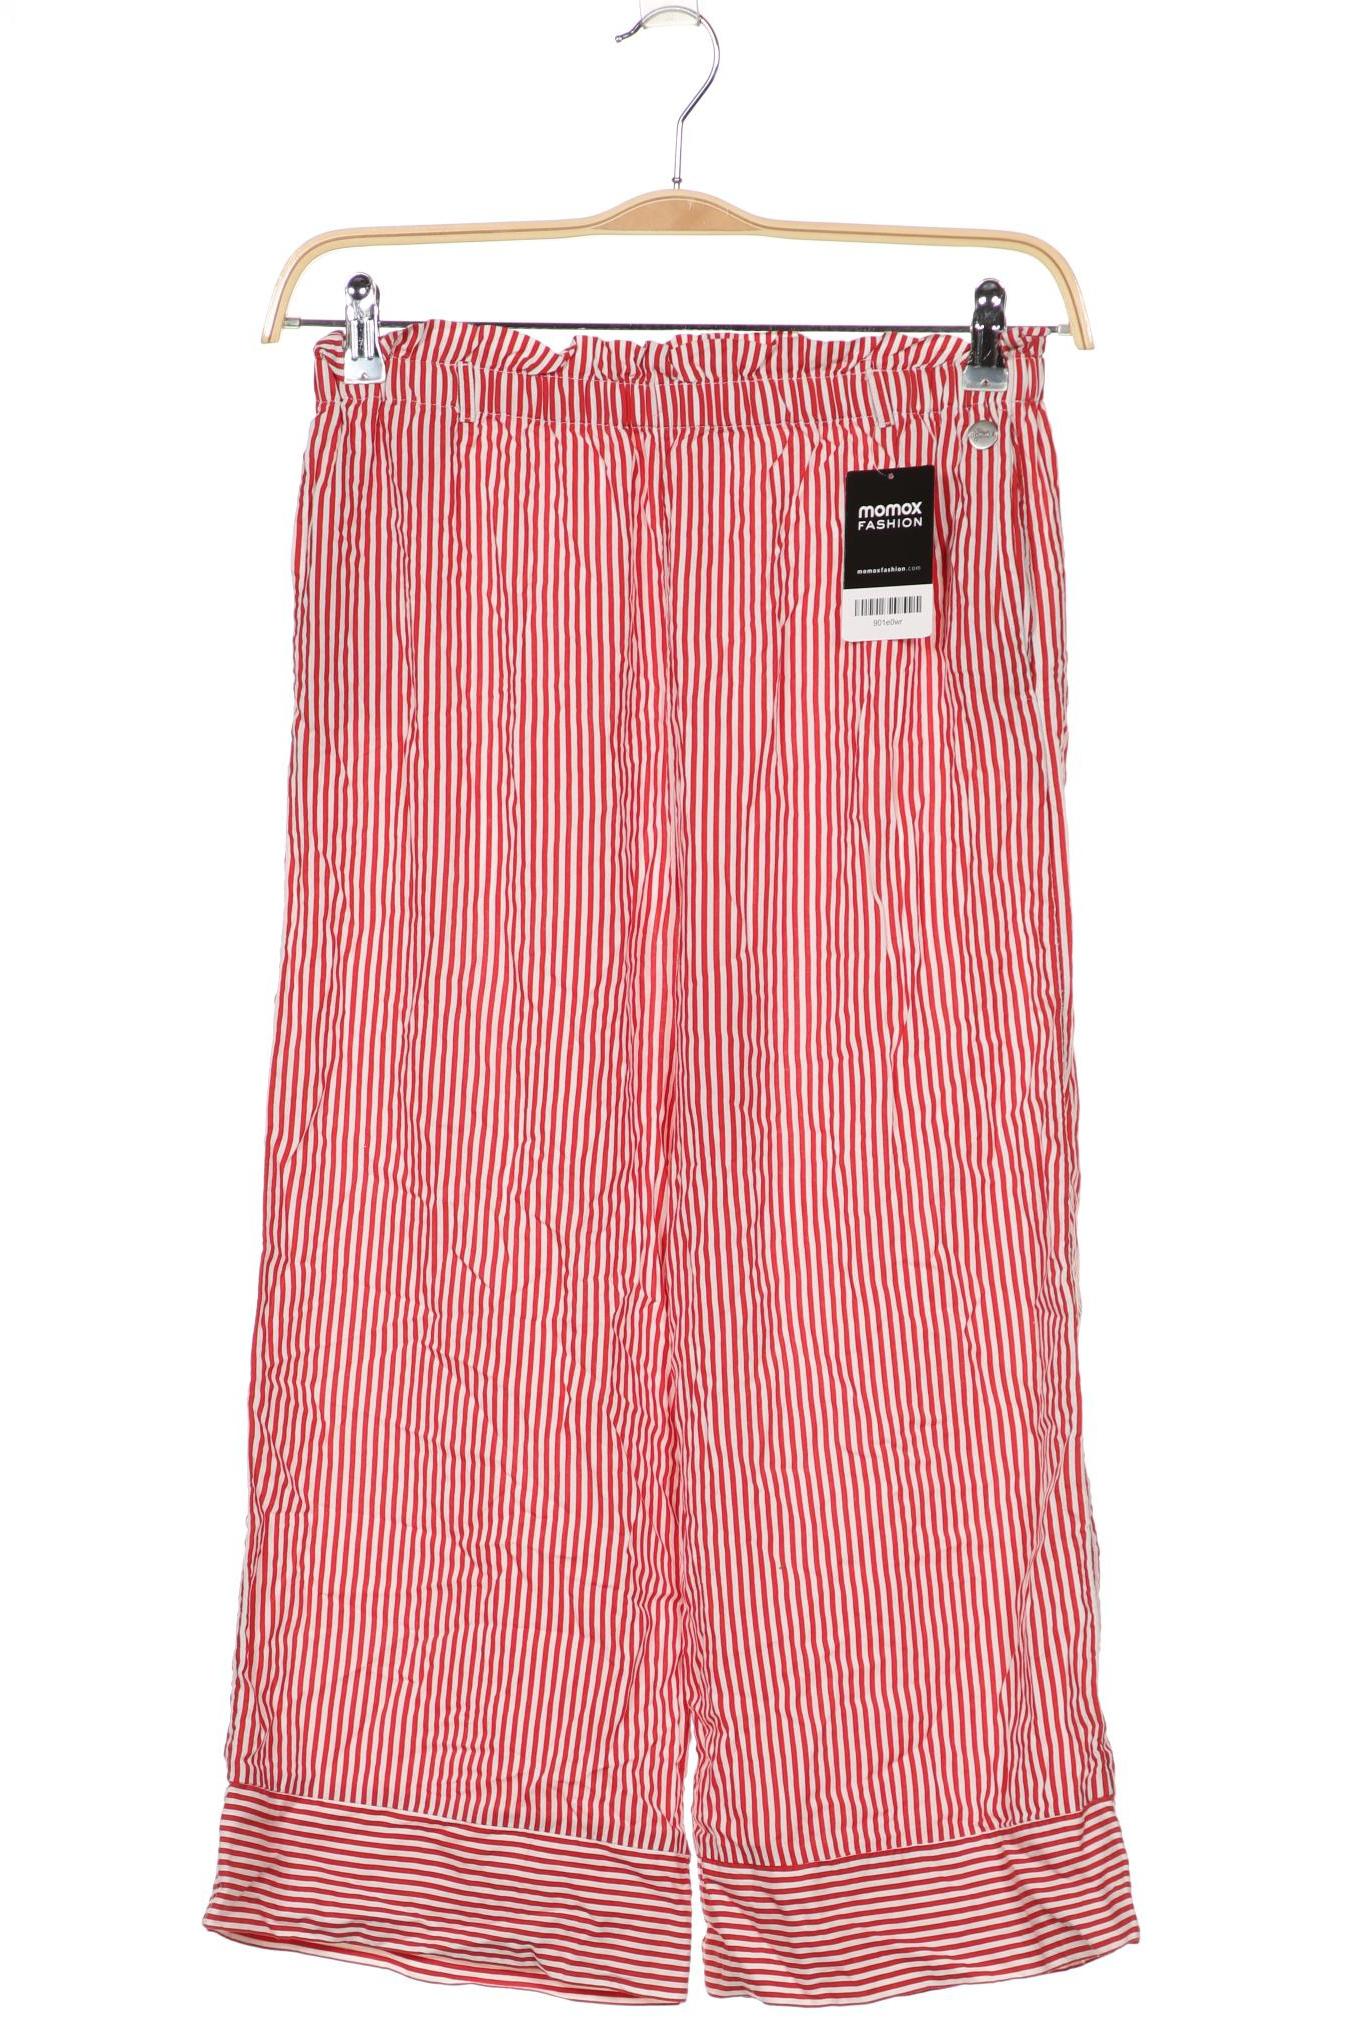 Pepe Jeans Mädchen Stoffhose, rot von Pepe Jeans